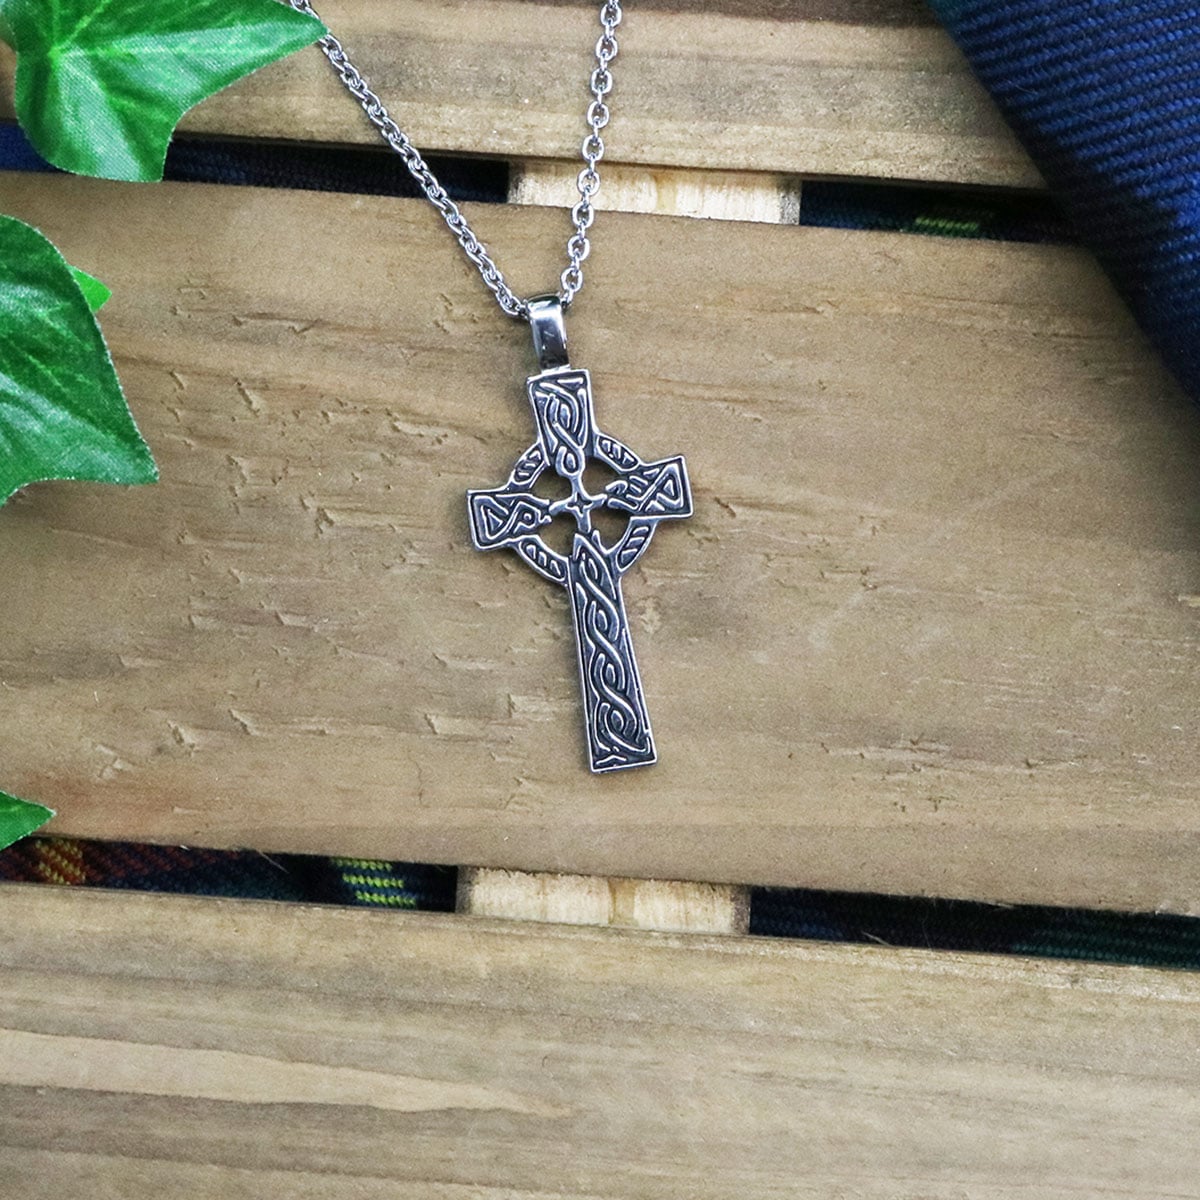 Celtic Wood Cross Pendant Stainless Steel Chain Necklace